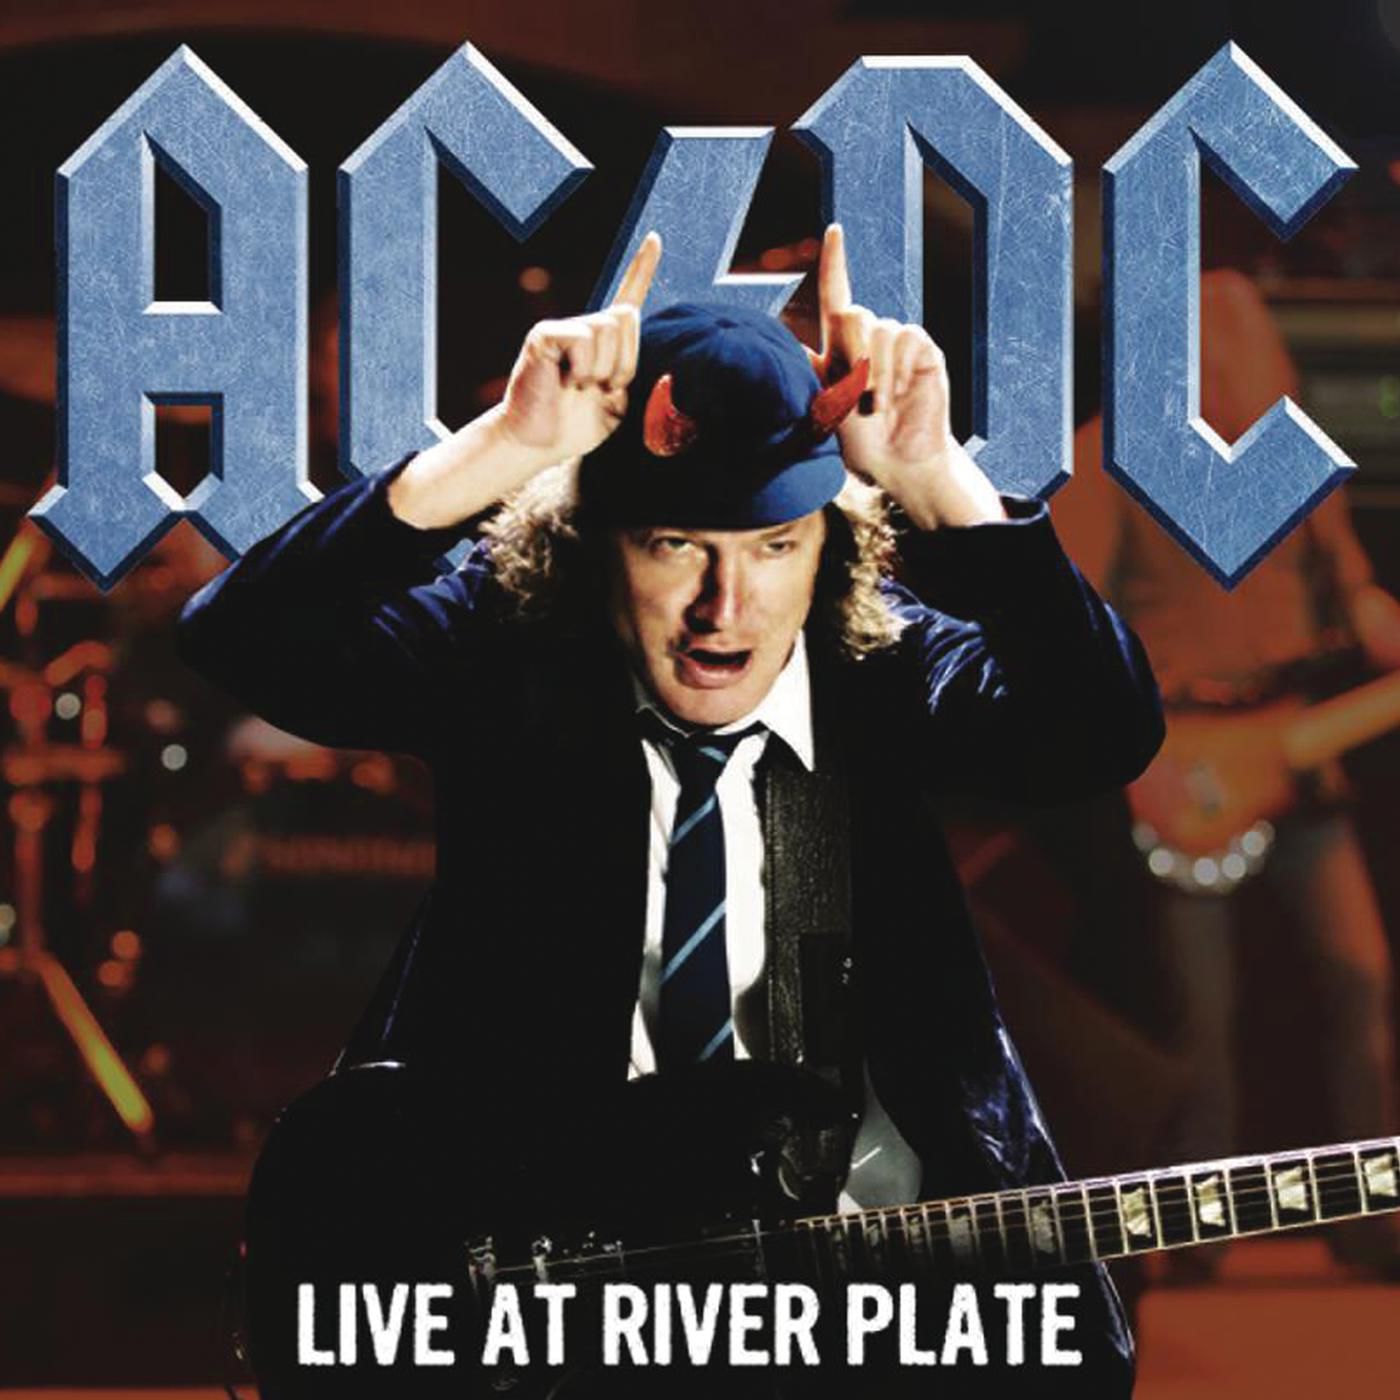 AC/DC - Live at River Plate (Remastered) (2012/2020) [FLAC 24bit/96kHz]